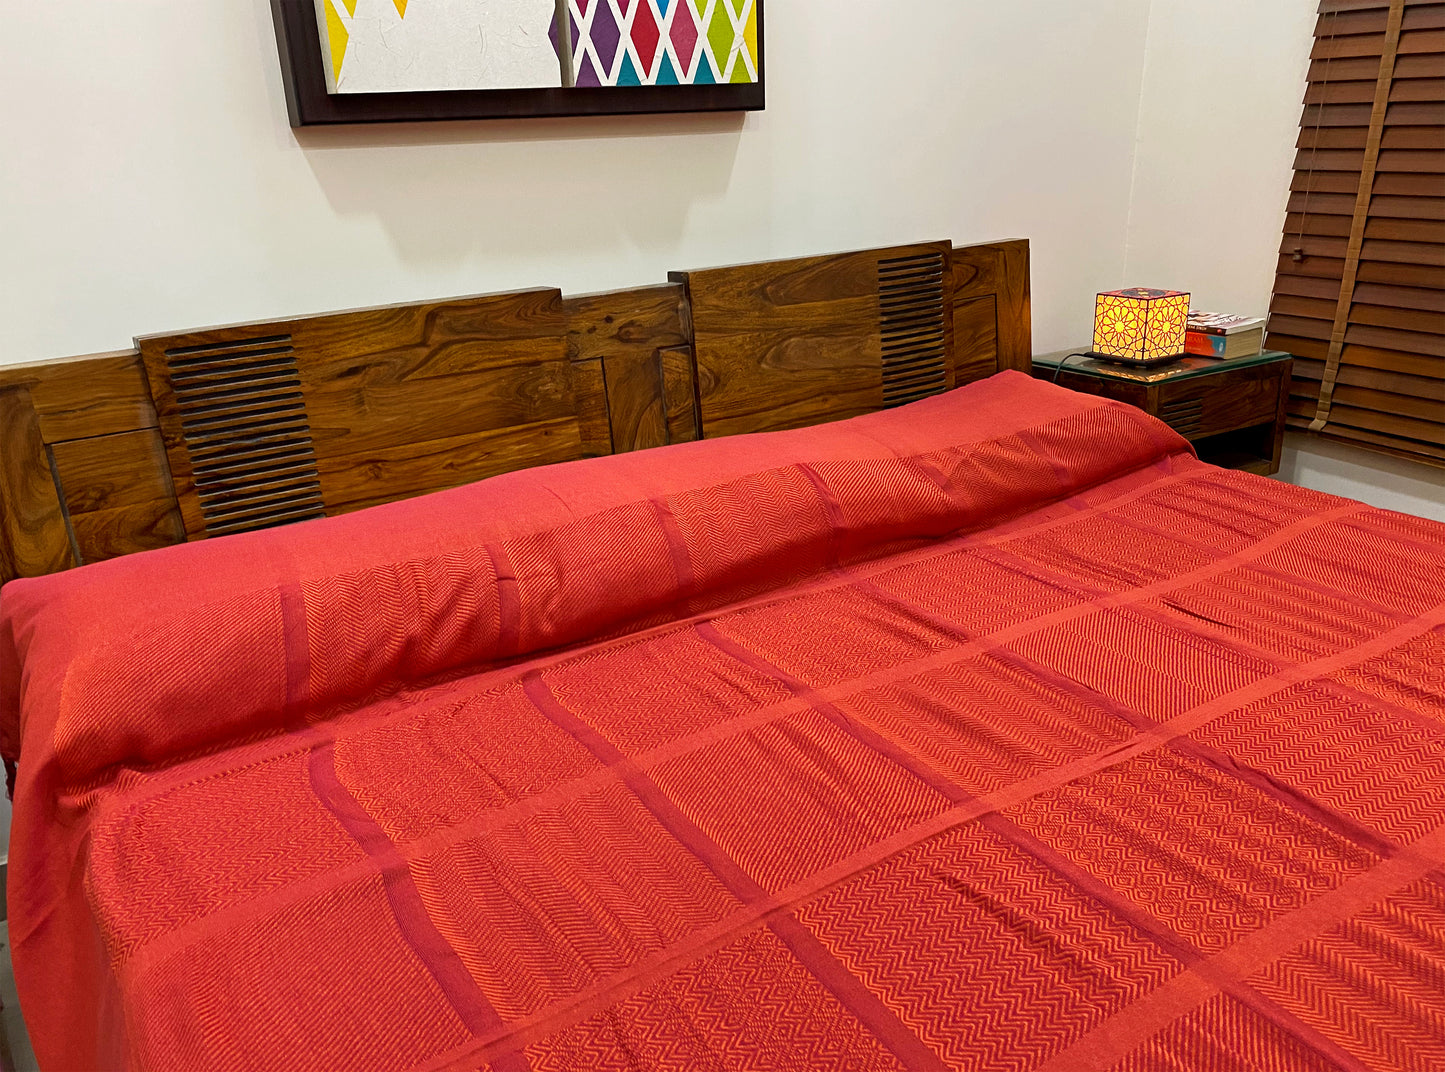 Red & Orange Woven Bed Cover